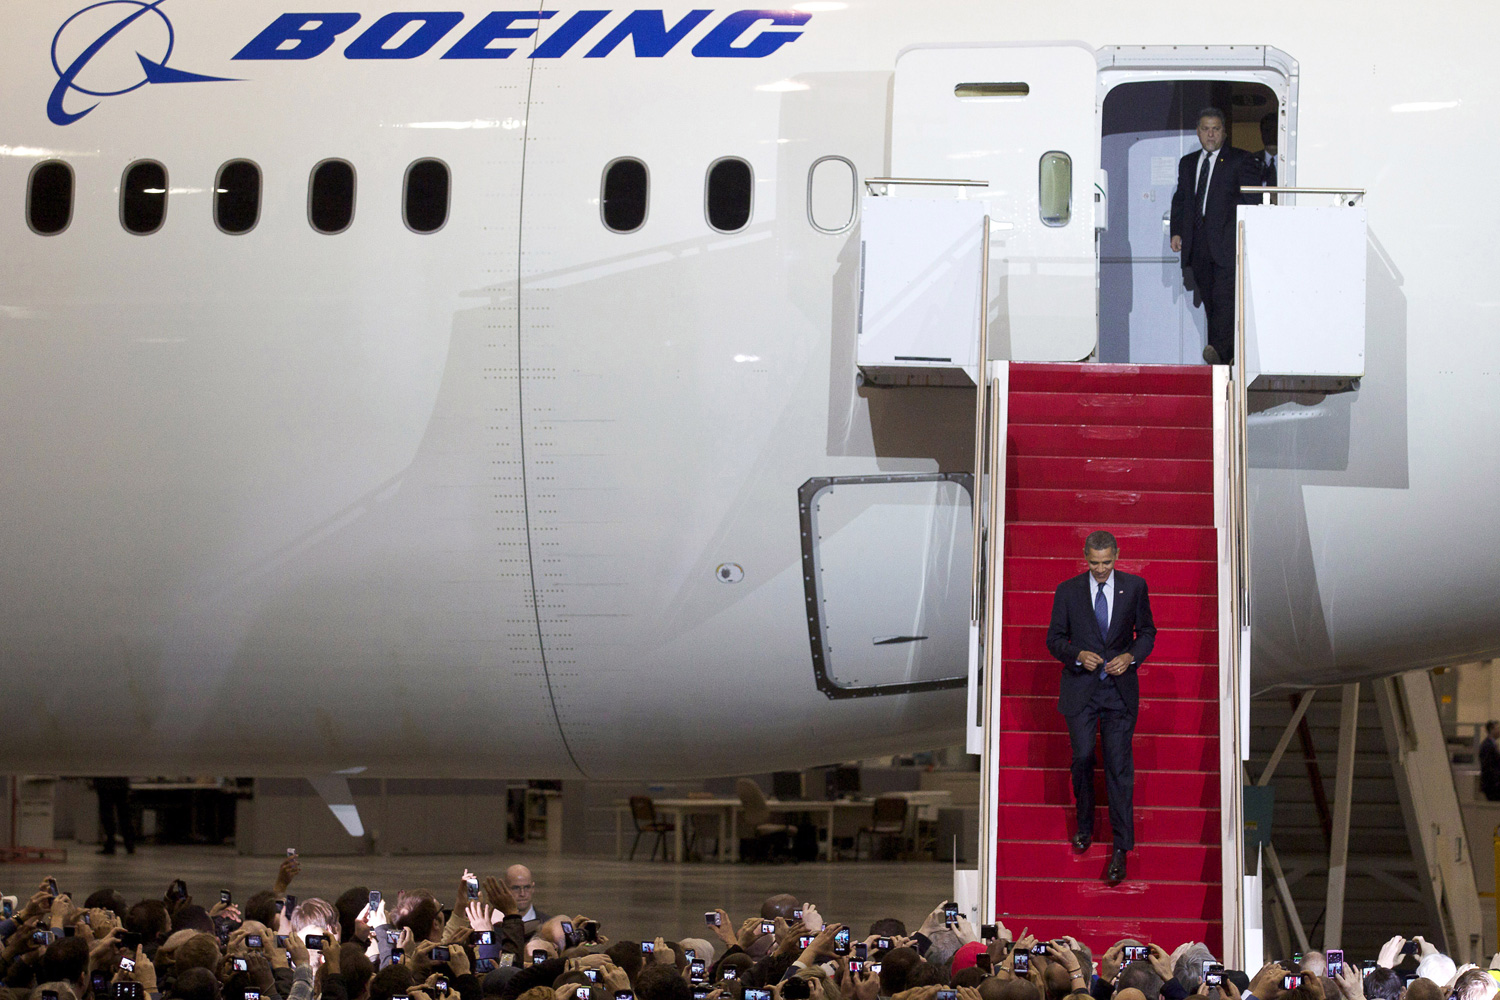 Feb. 17, 2012. President Barack Obama walks down the stairs of a Boeing 787 Dreamliner before giving a speech on the Boeing 787 Dreamliner assembly line in Everett, Wash.